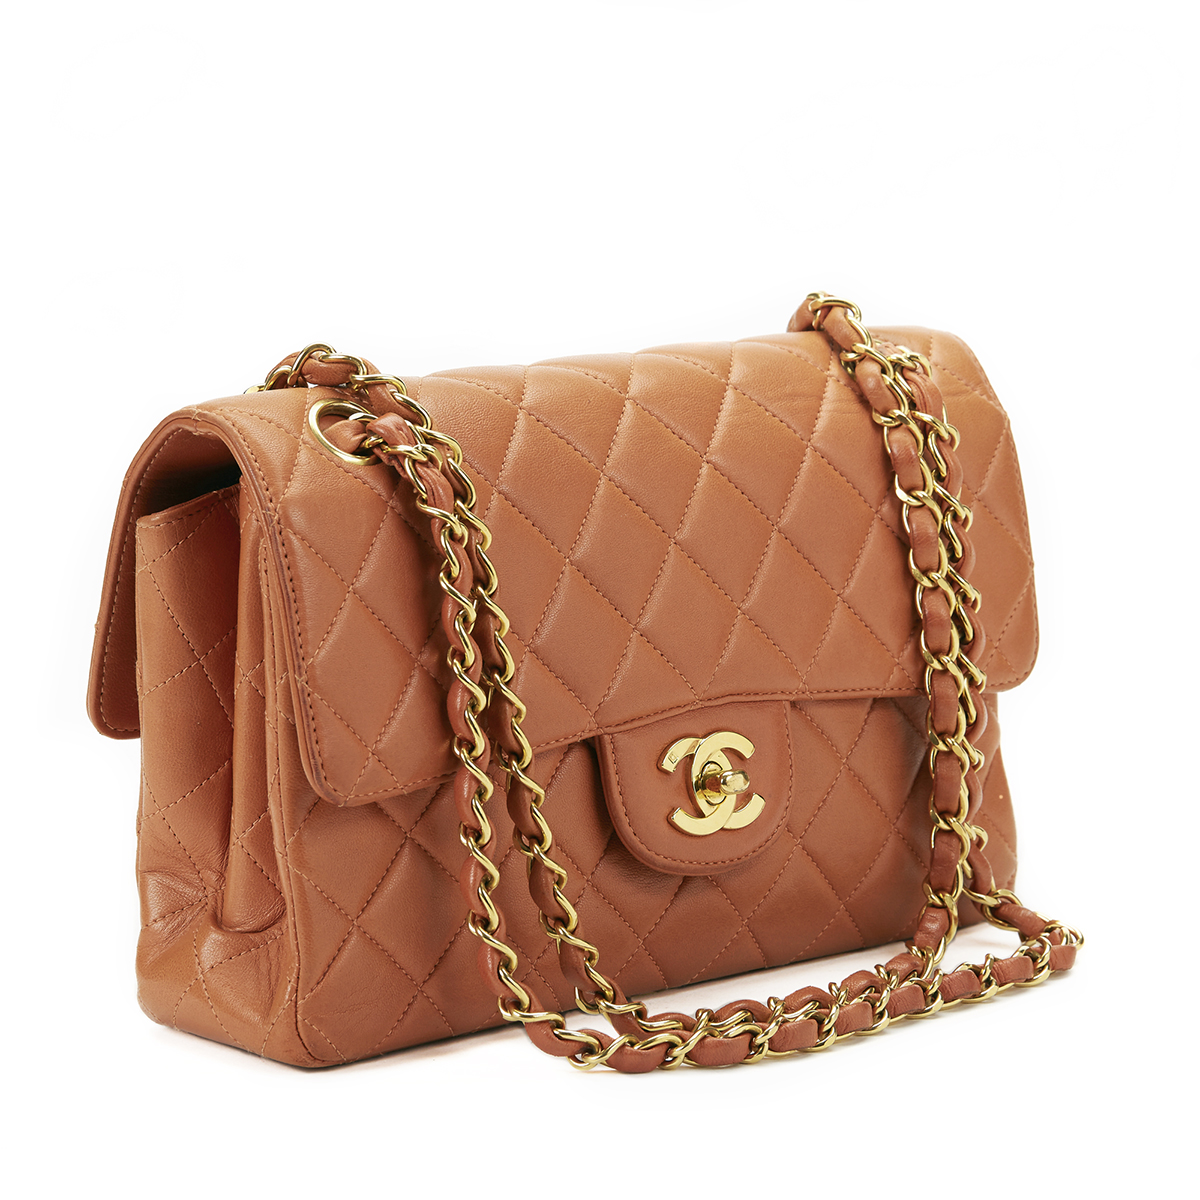 CHANEL Double Sided Small Classic Flap Bag - Image 7 of 9